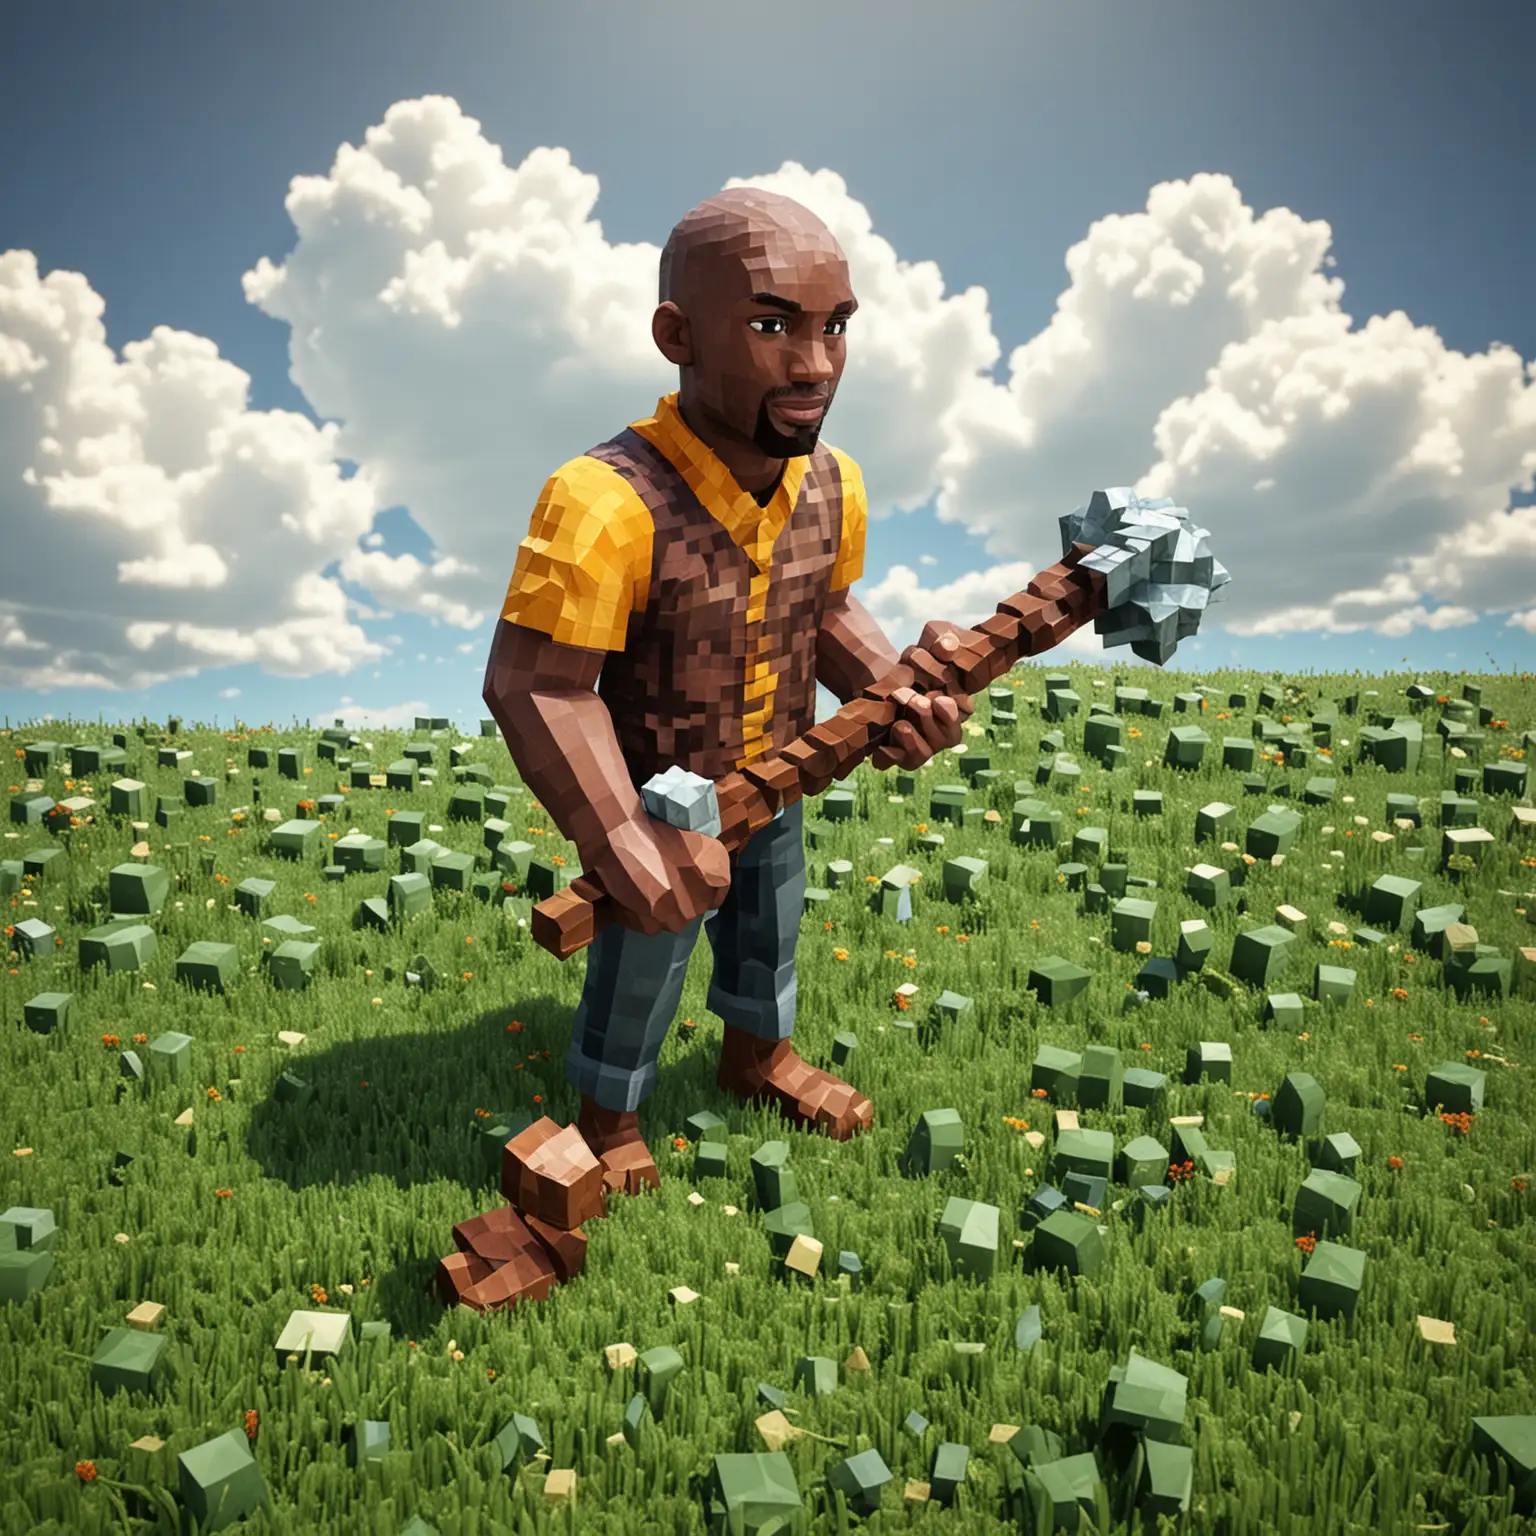 Kobe-Bryant-Minecraft-Tribute-Mamba-Out-Pixel-Clouds-and-Diamond-Pickaxe-Digging